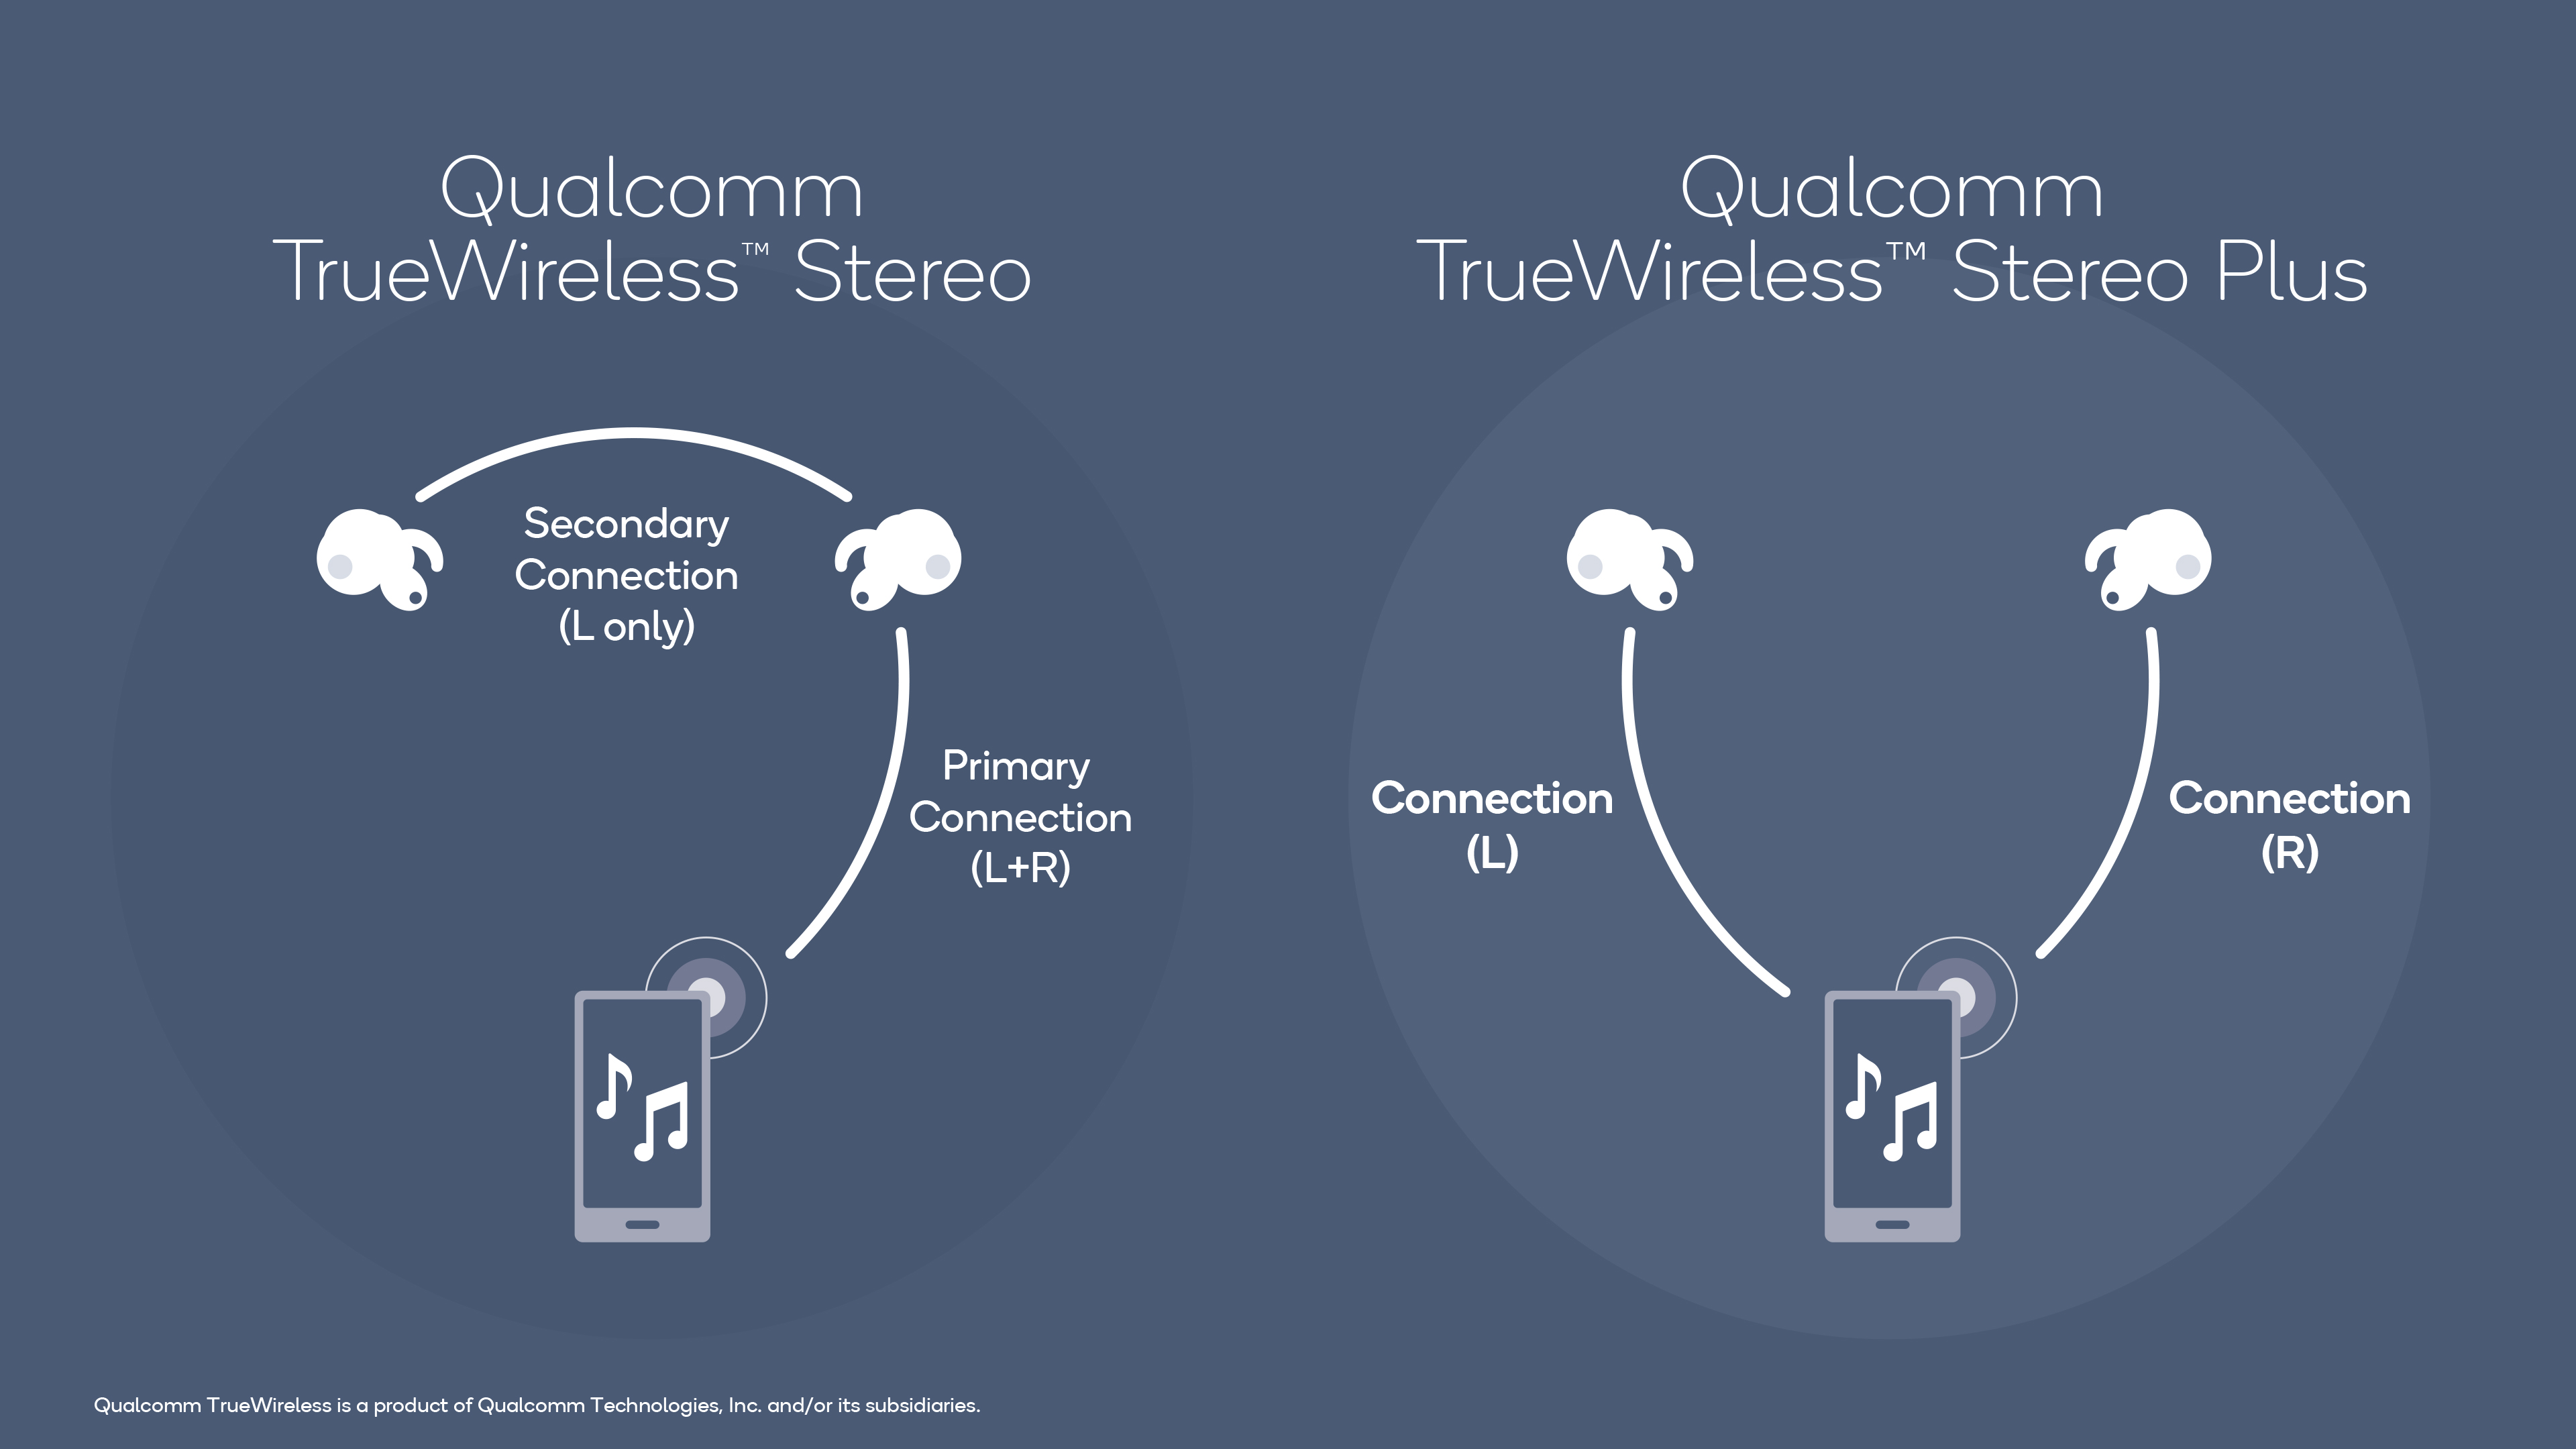 A diagram of Qualcomm True Wireless Stereo Plus and how it works compared to regular stereo connectivity.